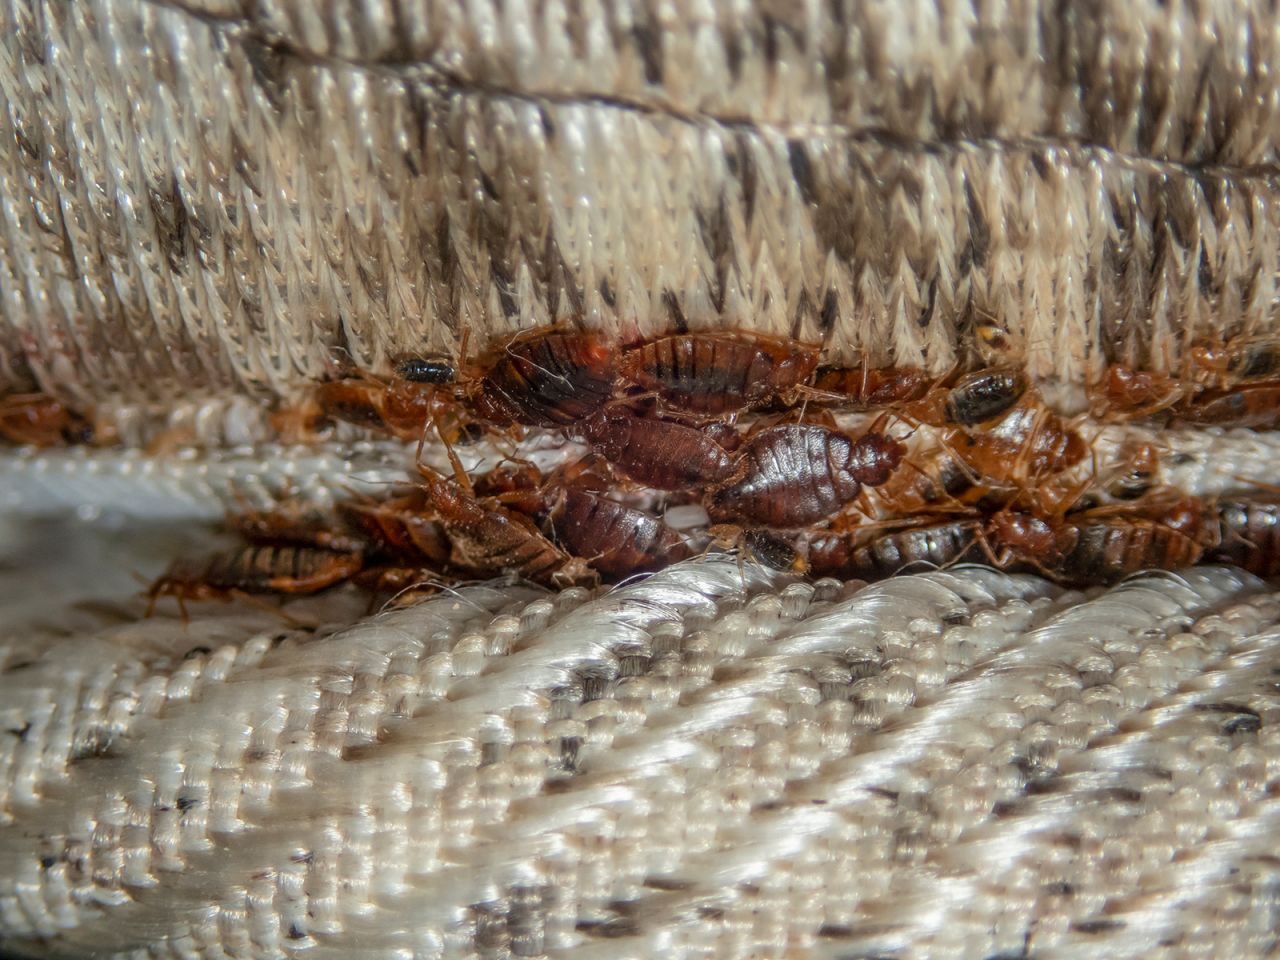 Serious bed bug infestation, bed bugs developed unnoticed on the mattress in folds and seams.